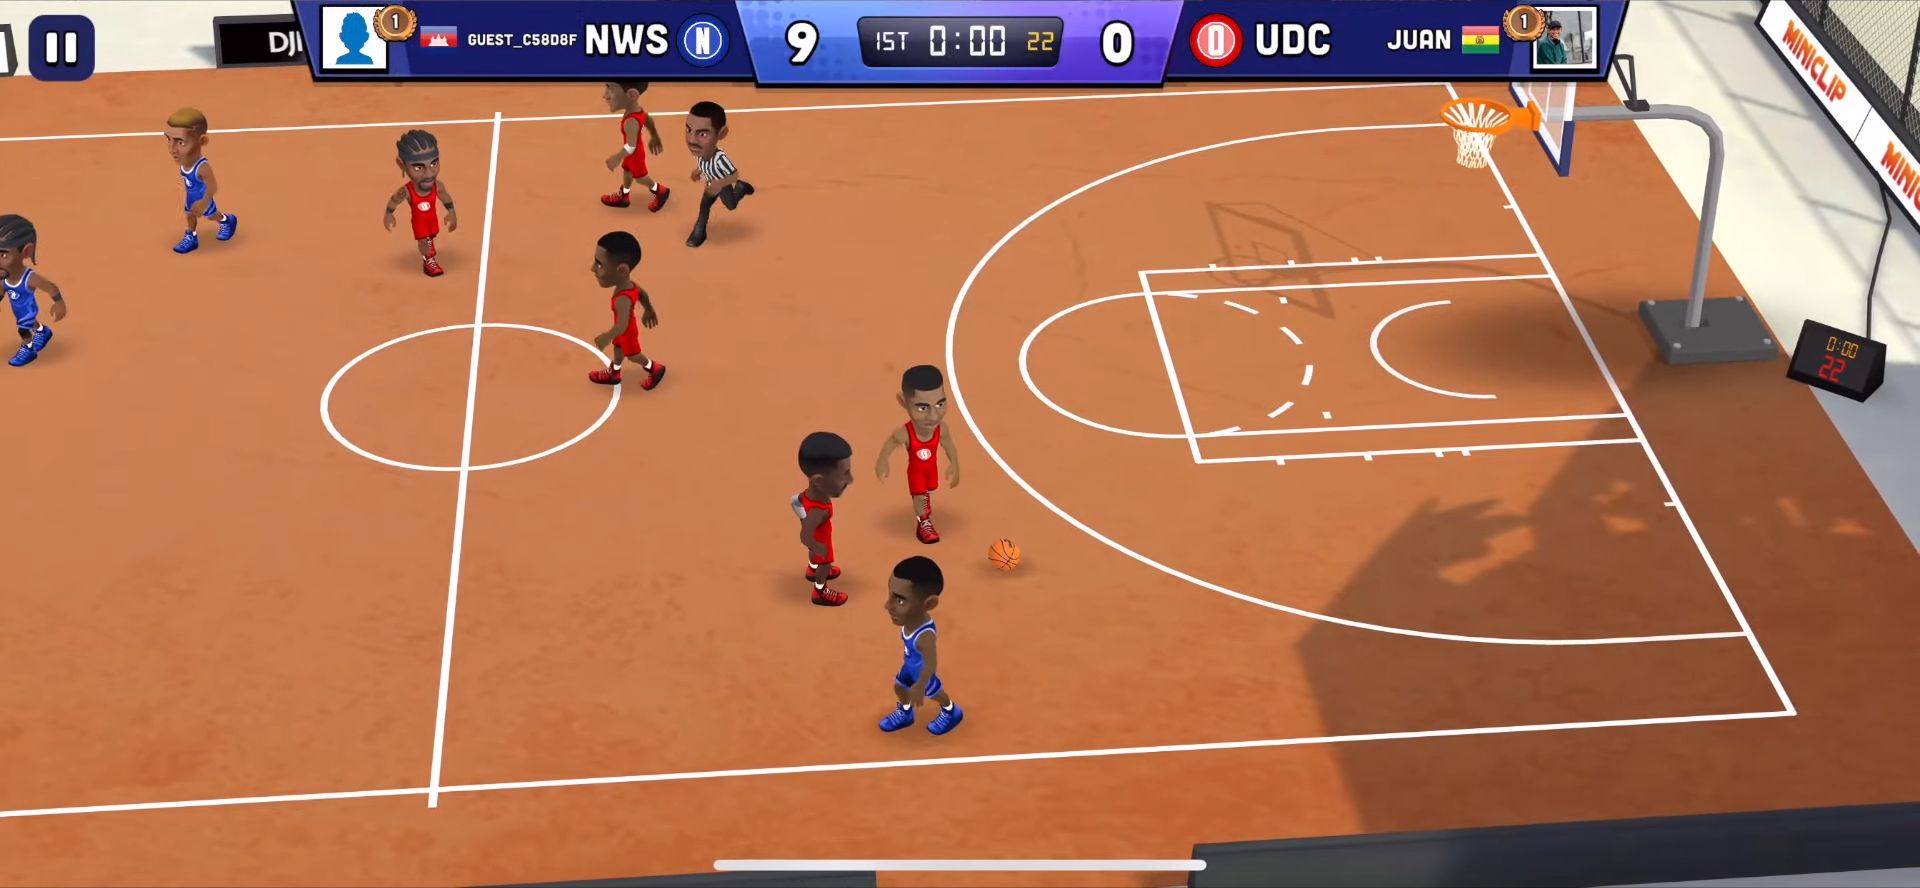 Full version of Android A.n.d.r.o.i.d. .5...0. .a.n.d. .m.o.r.e apk Mini Basketball for tablet and phone.